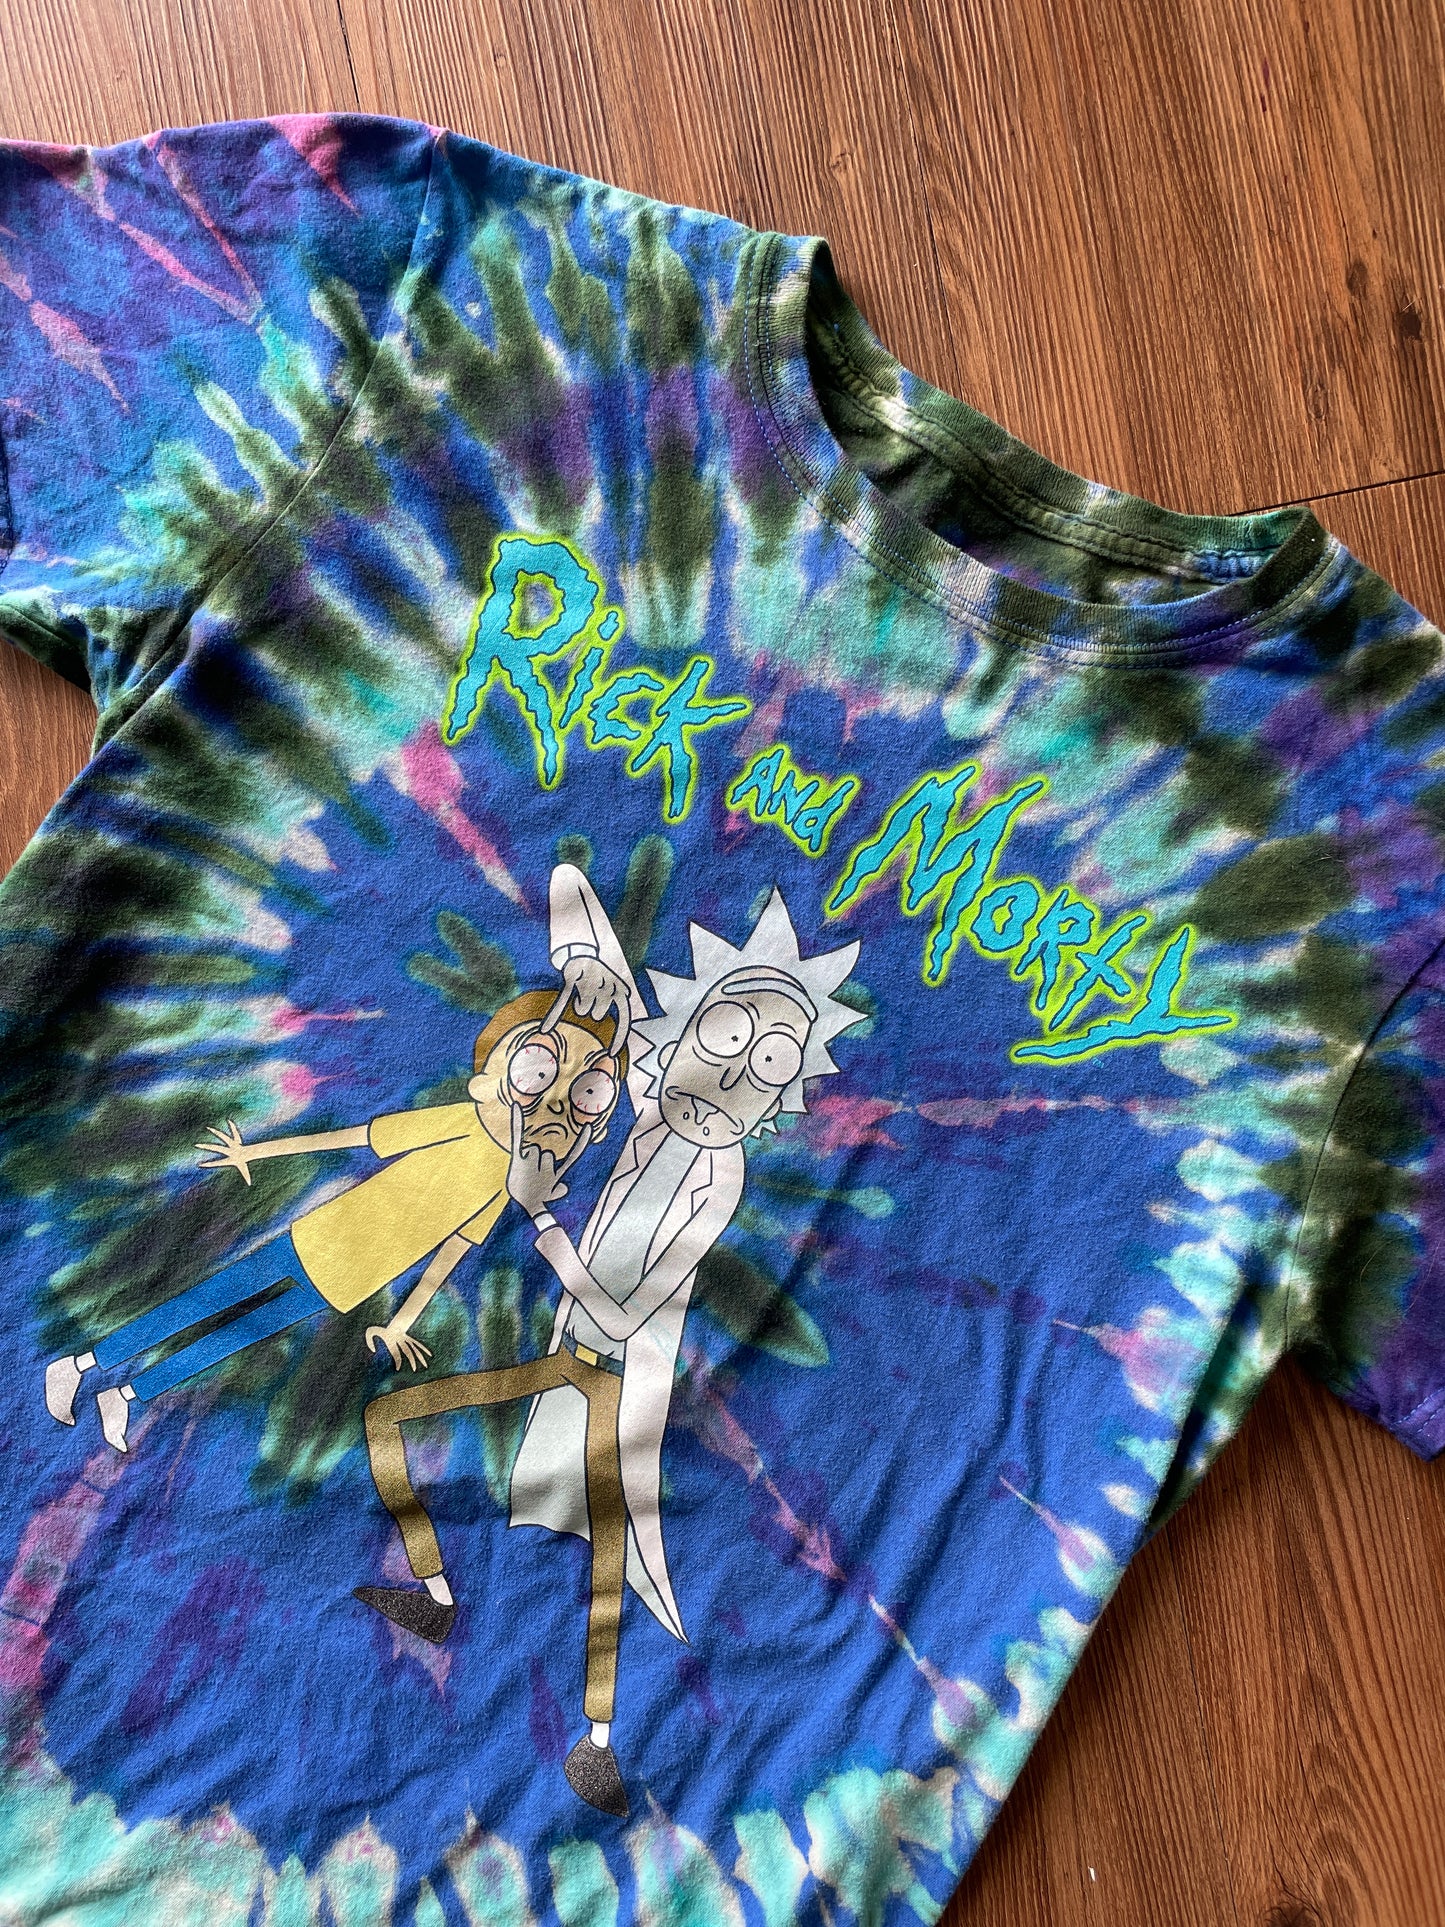 MEDIUM Men’s Rick and Morty Tie Dye T-Shirt | Blue and Green Open Your Eyes Morty Spiral Reverse Tie Dye Short Sleeve